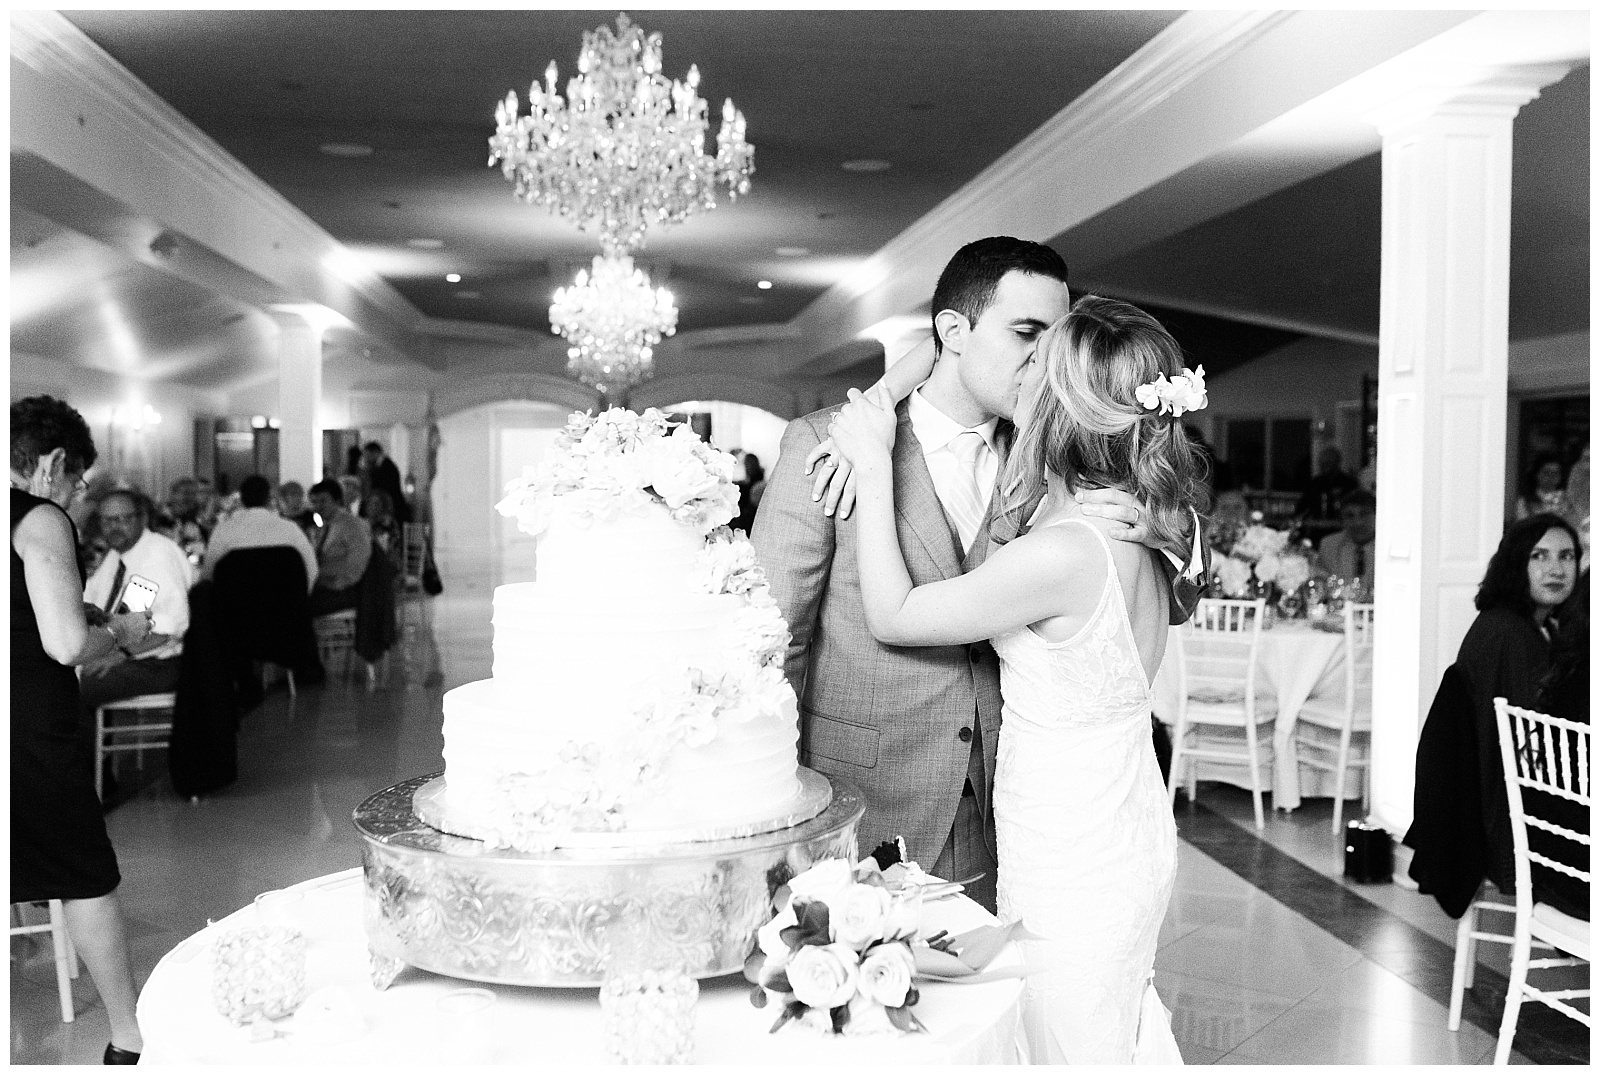 Bride and groom kiss after cutting their wedding cake at their reception.